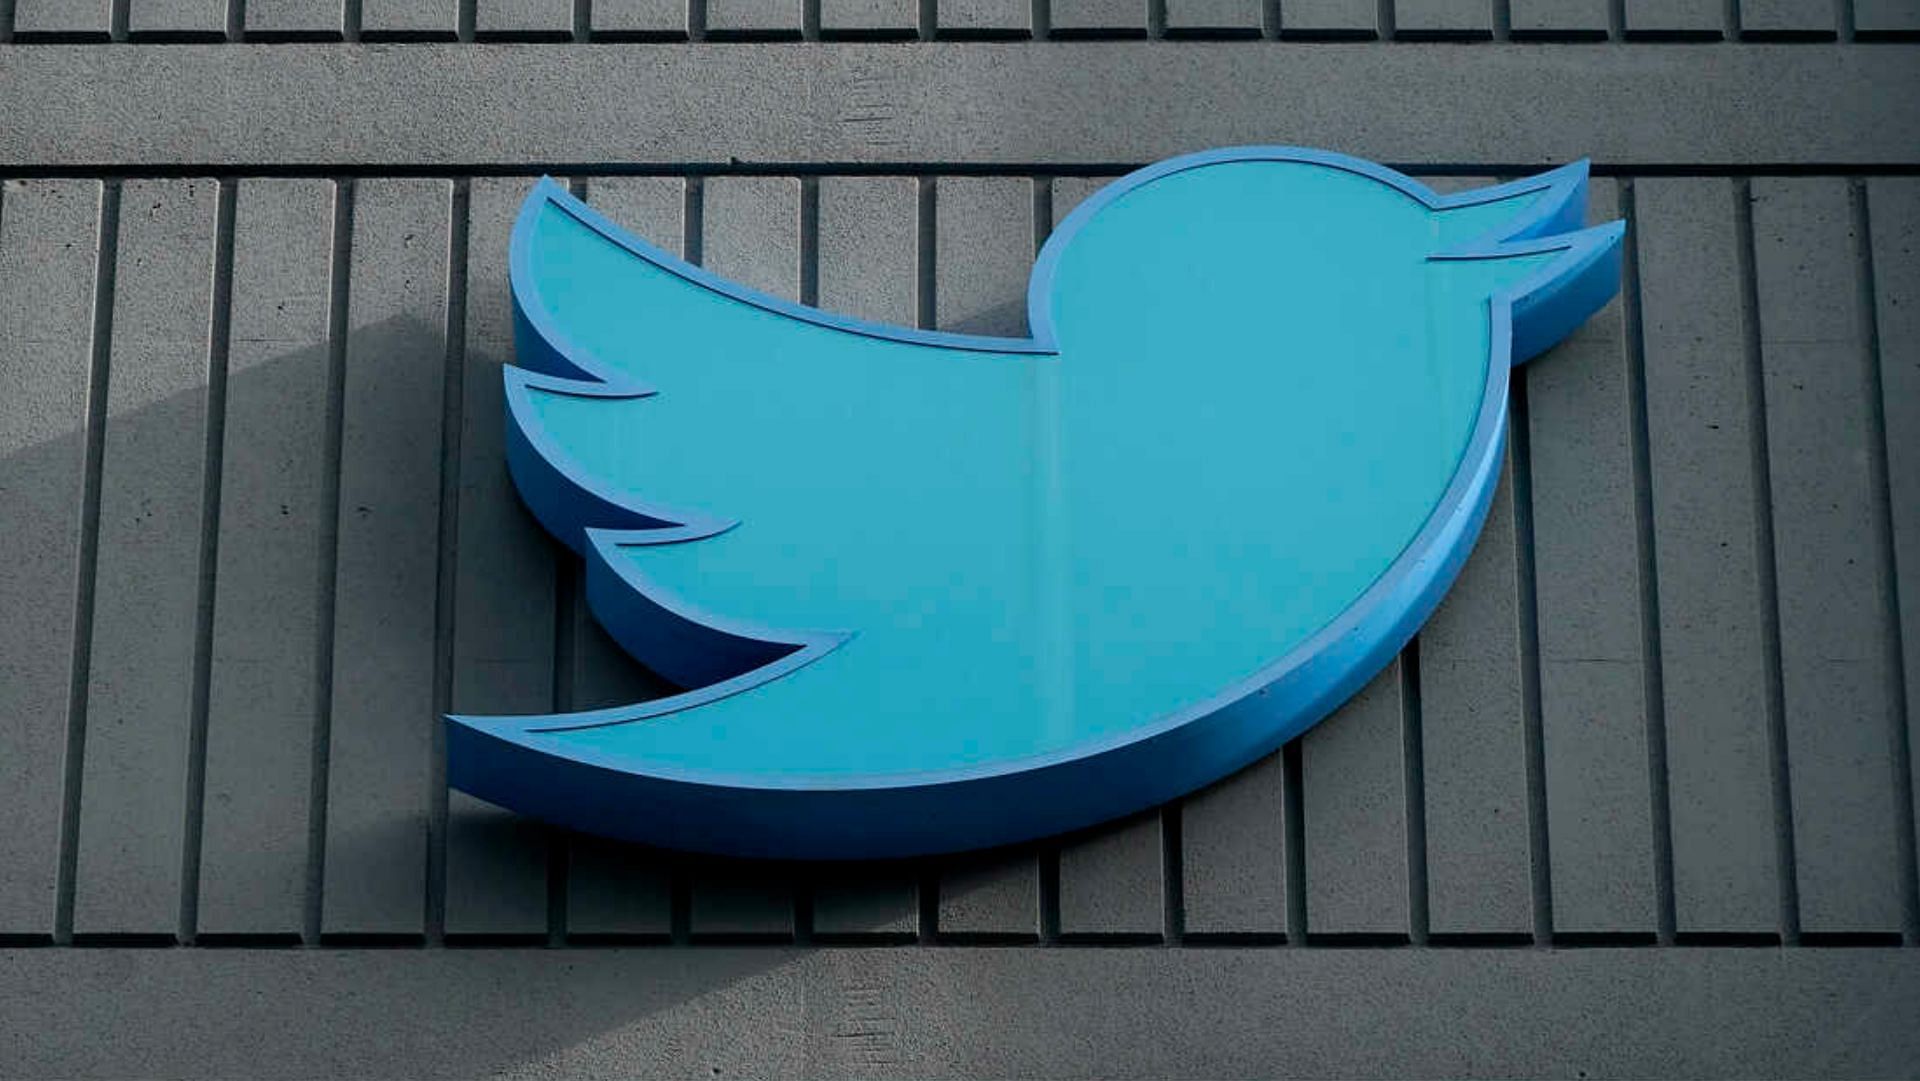 Twitter Blue is set to come back after a temporary hiatus (Image via Twitter)